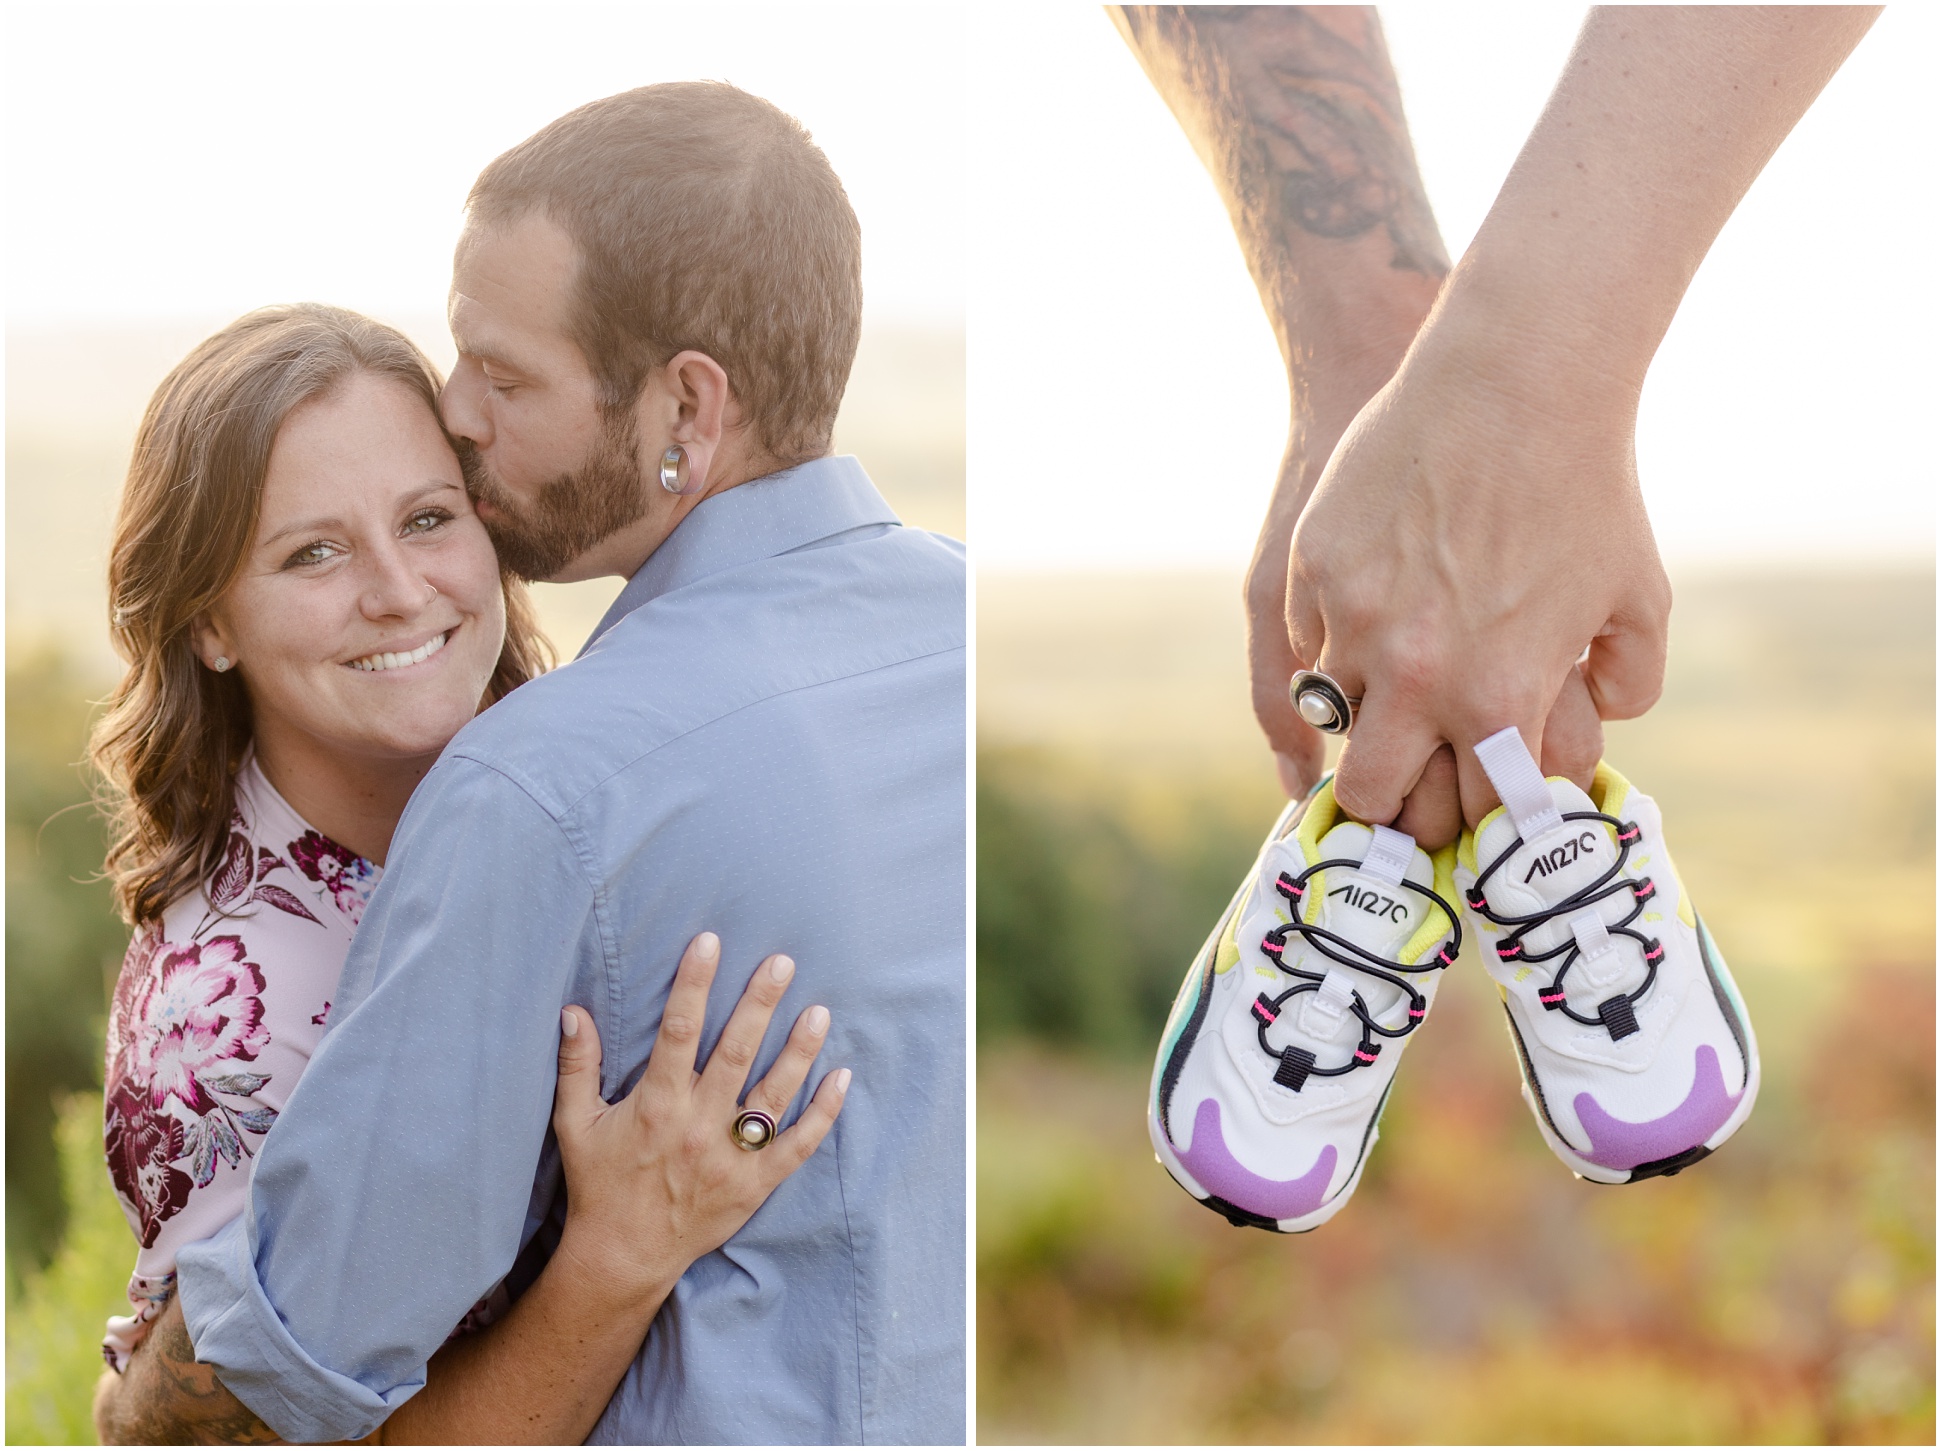 Left: Mallory and Jimmy Hugging, Right: Hands holding little Nike Air maxes for a baby